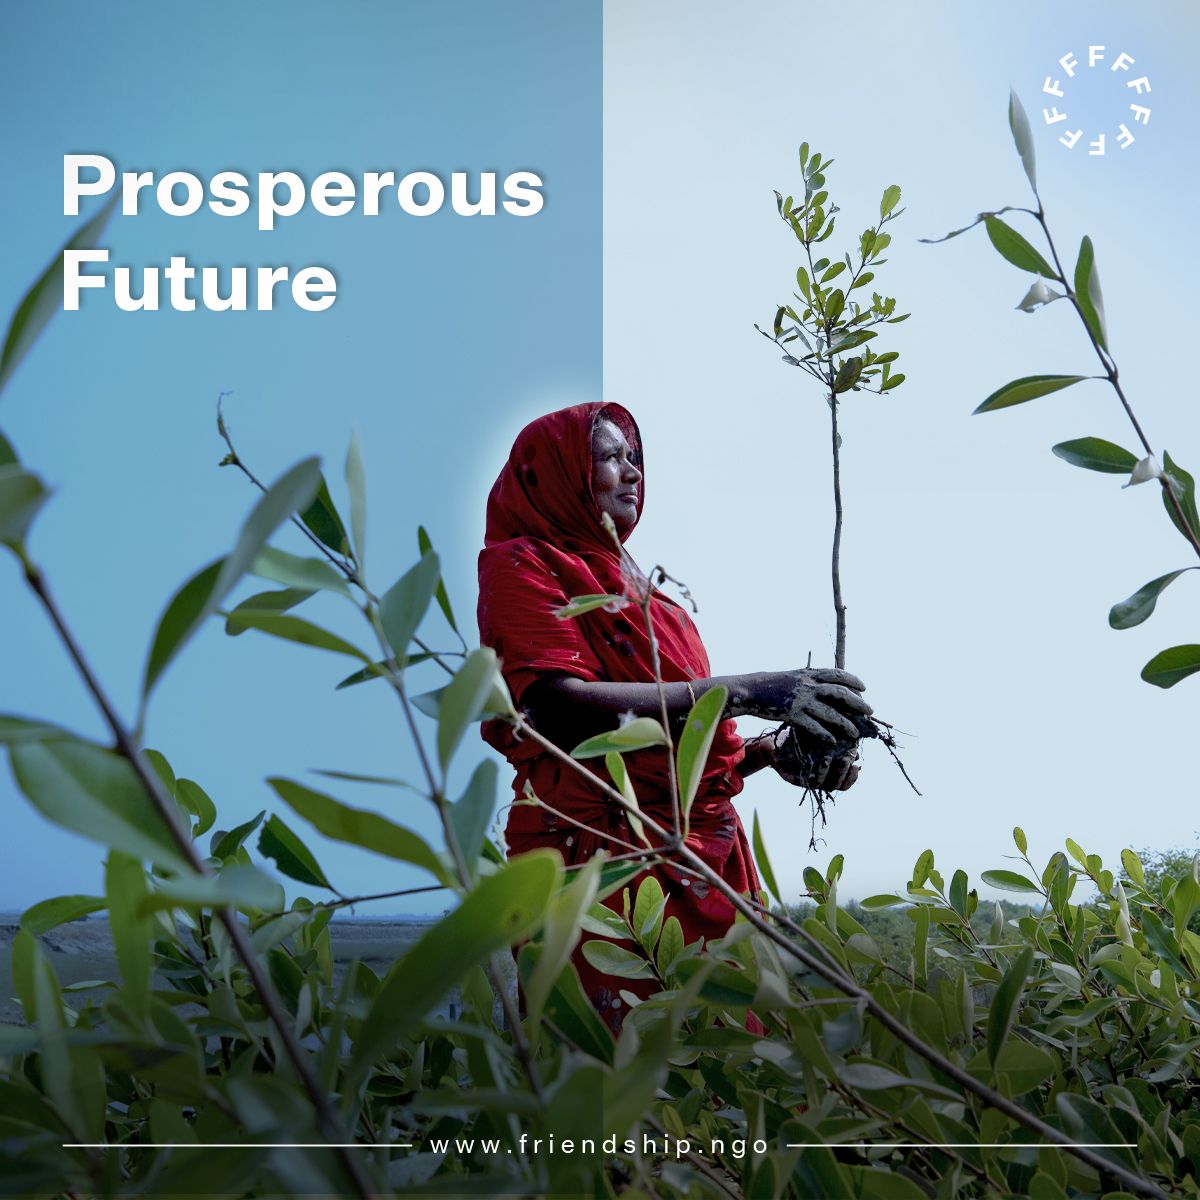 Every #mangrove sapling planted is a beacon of hope for local communities, promising a future where #livelihoods are secured through nature's bounty. As these saplings mature, they'll provide essential resources, symbolizing a greener, more prosperous future for all. #SDG1 #SDG13